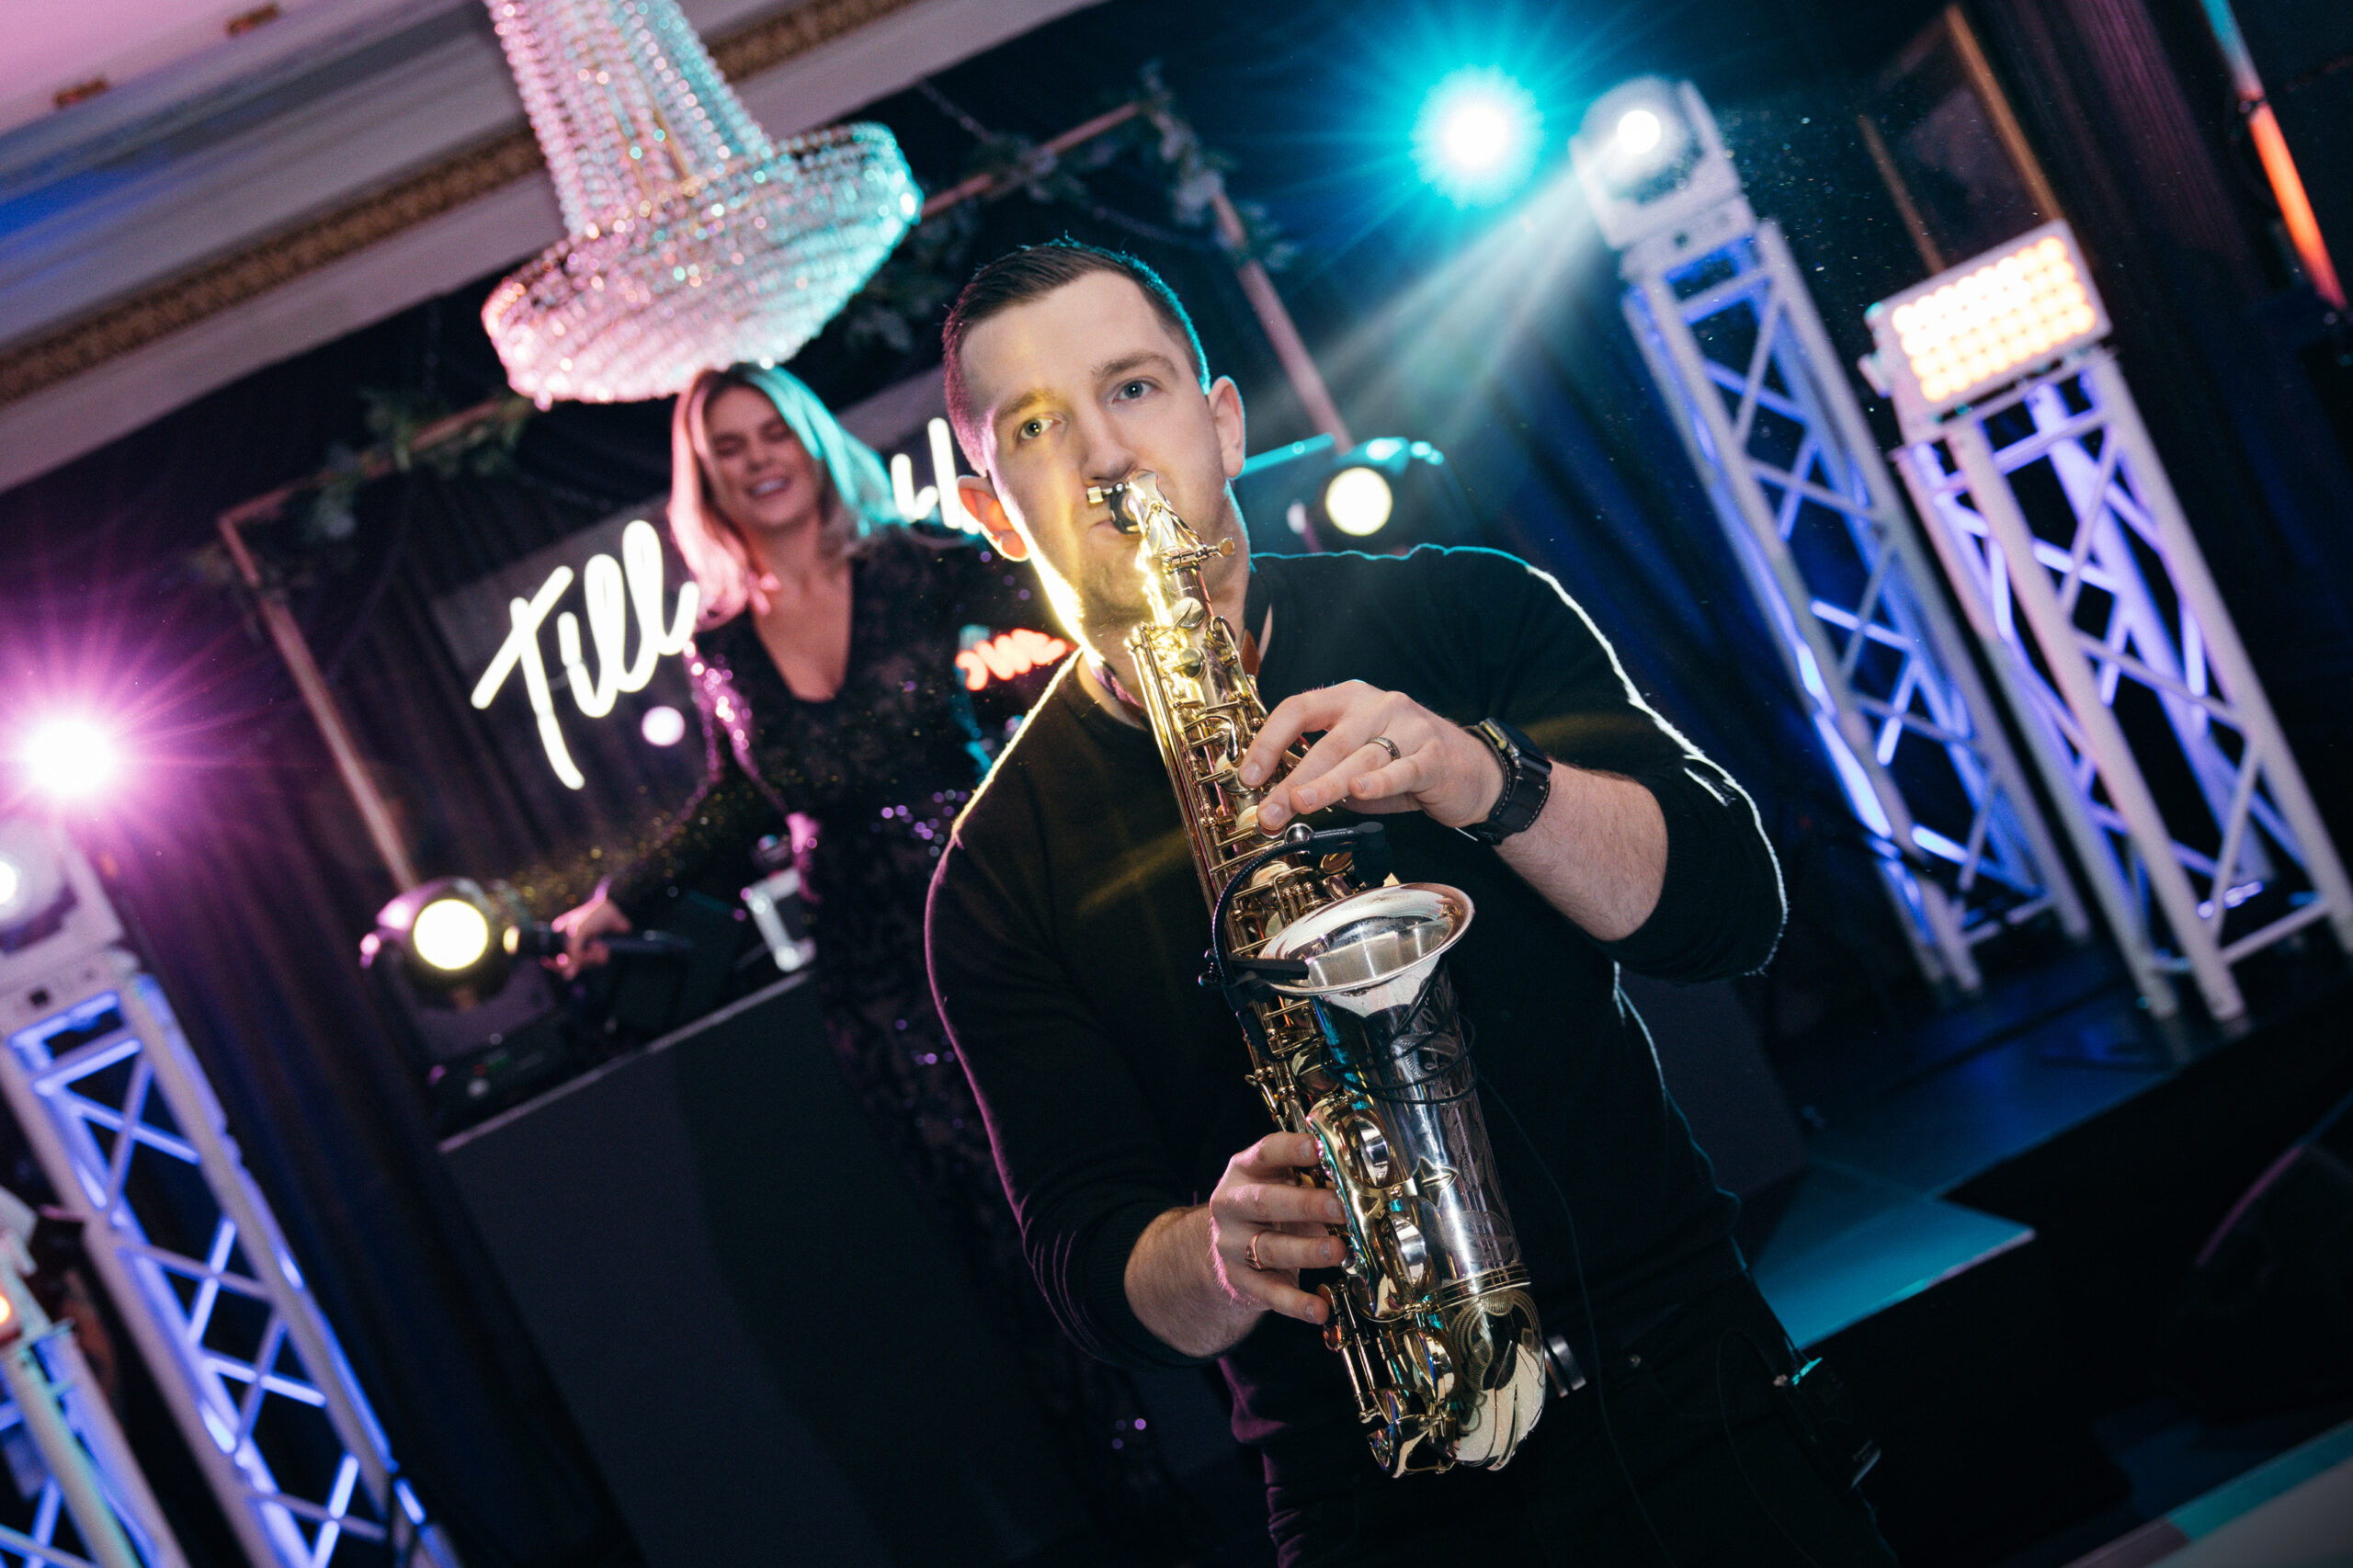 Wedding musicians, DJ Sax and Percussion Liver performing